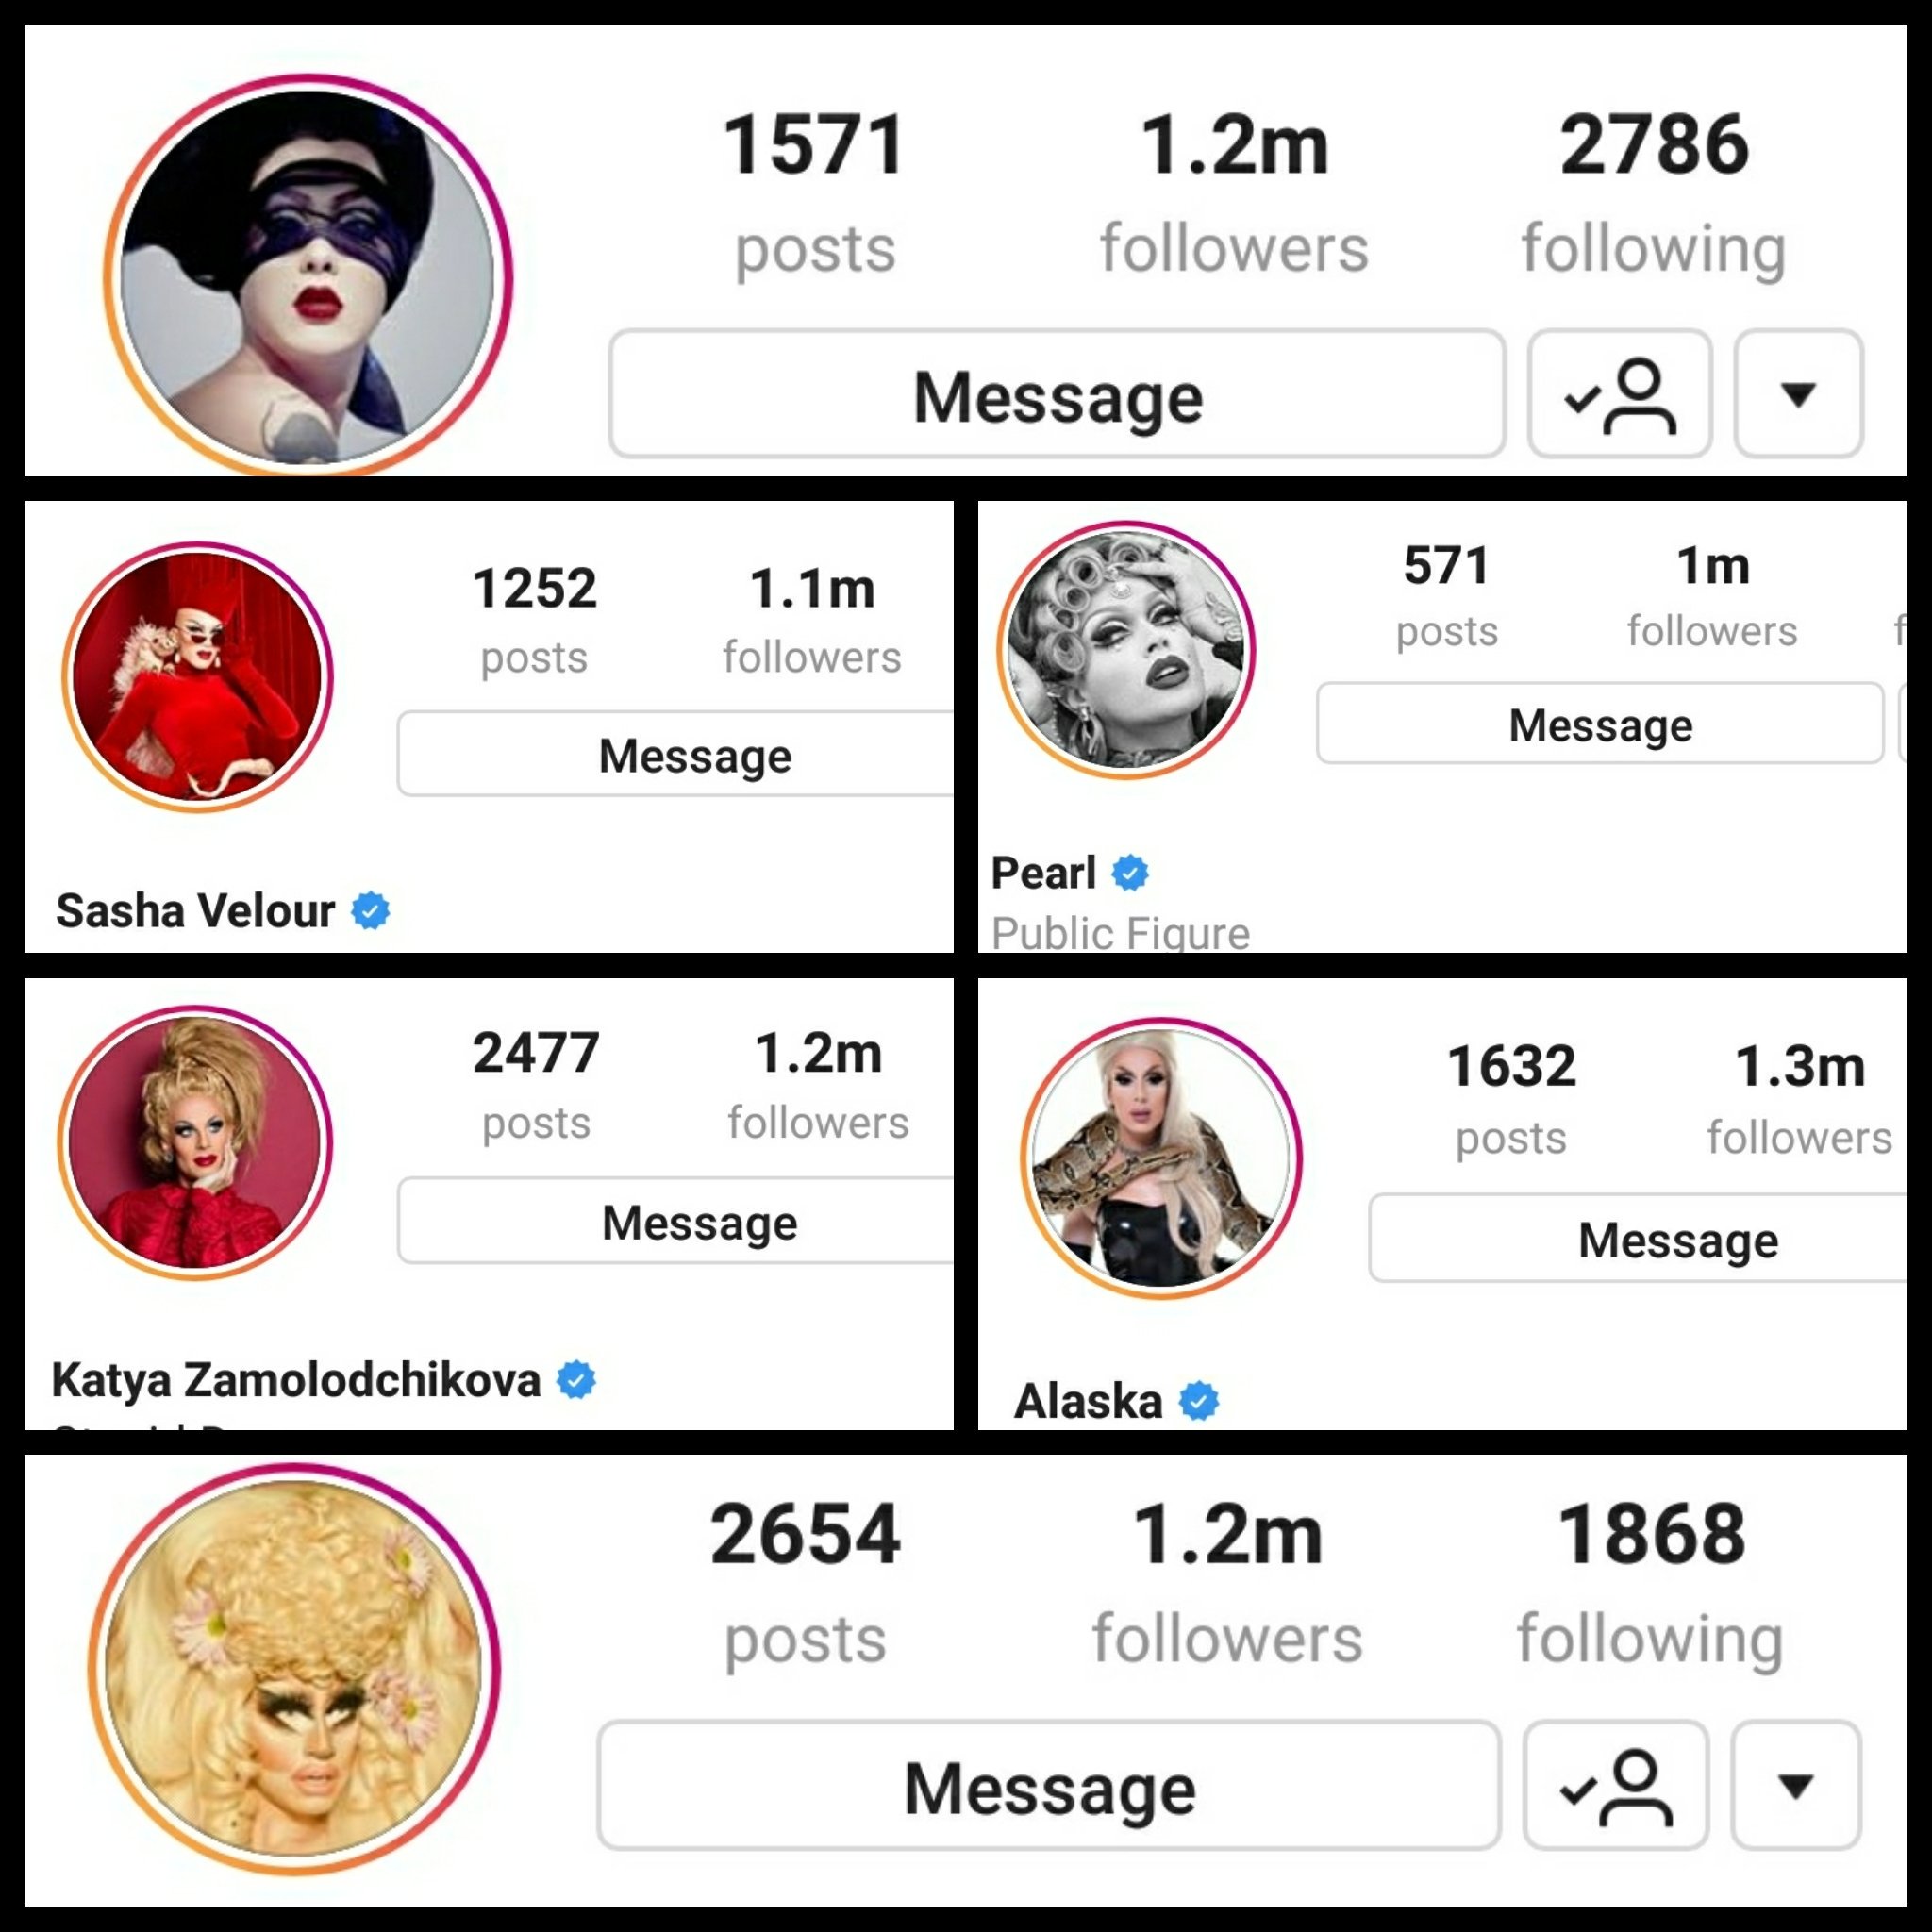 bob the drag queenverified account - most followed drag queen on instagram